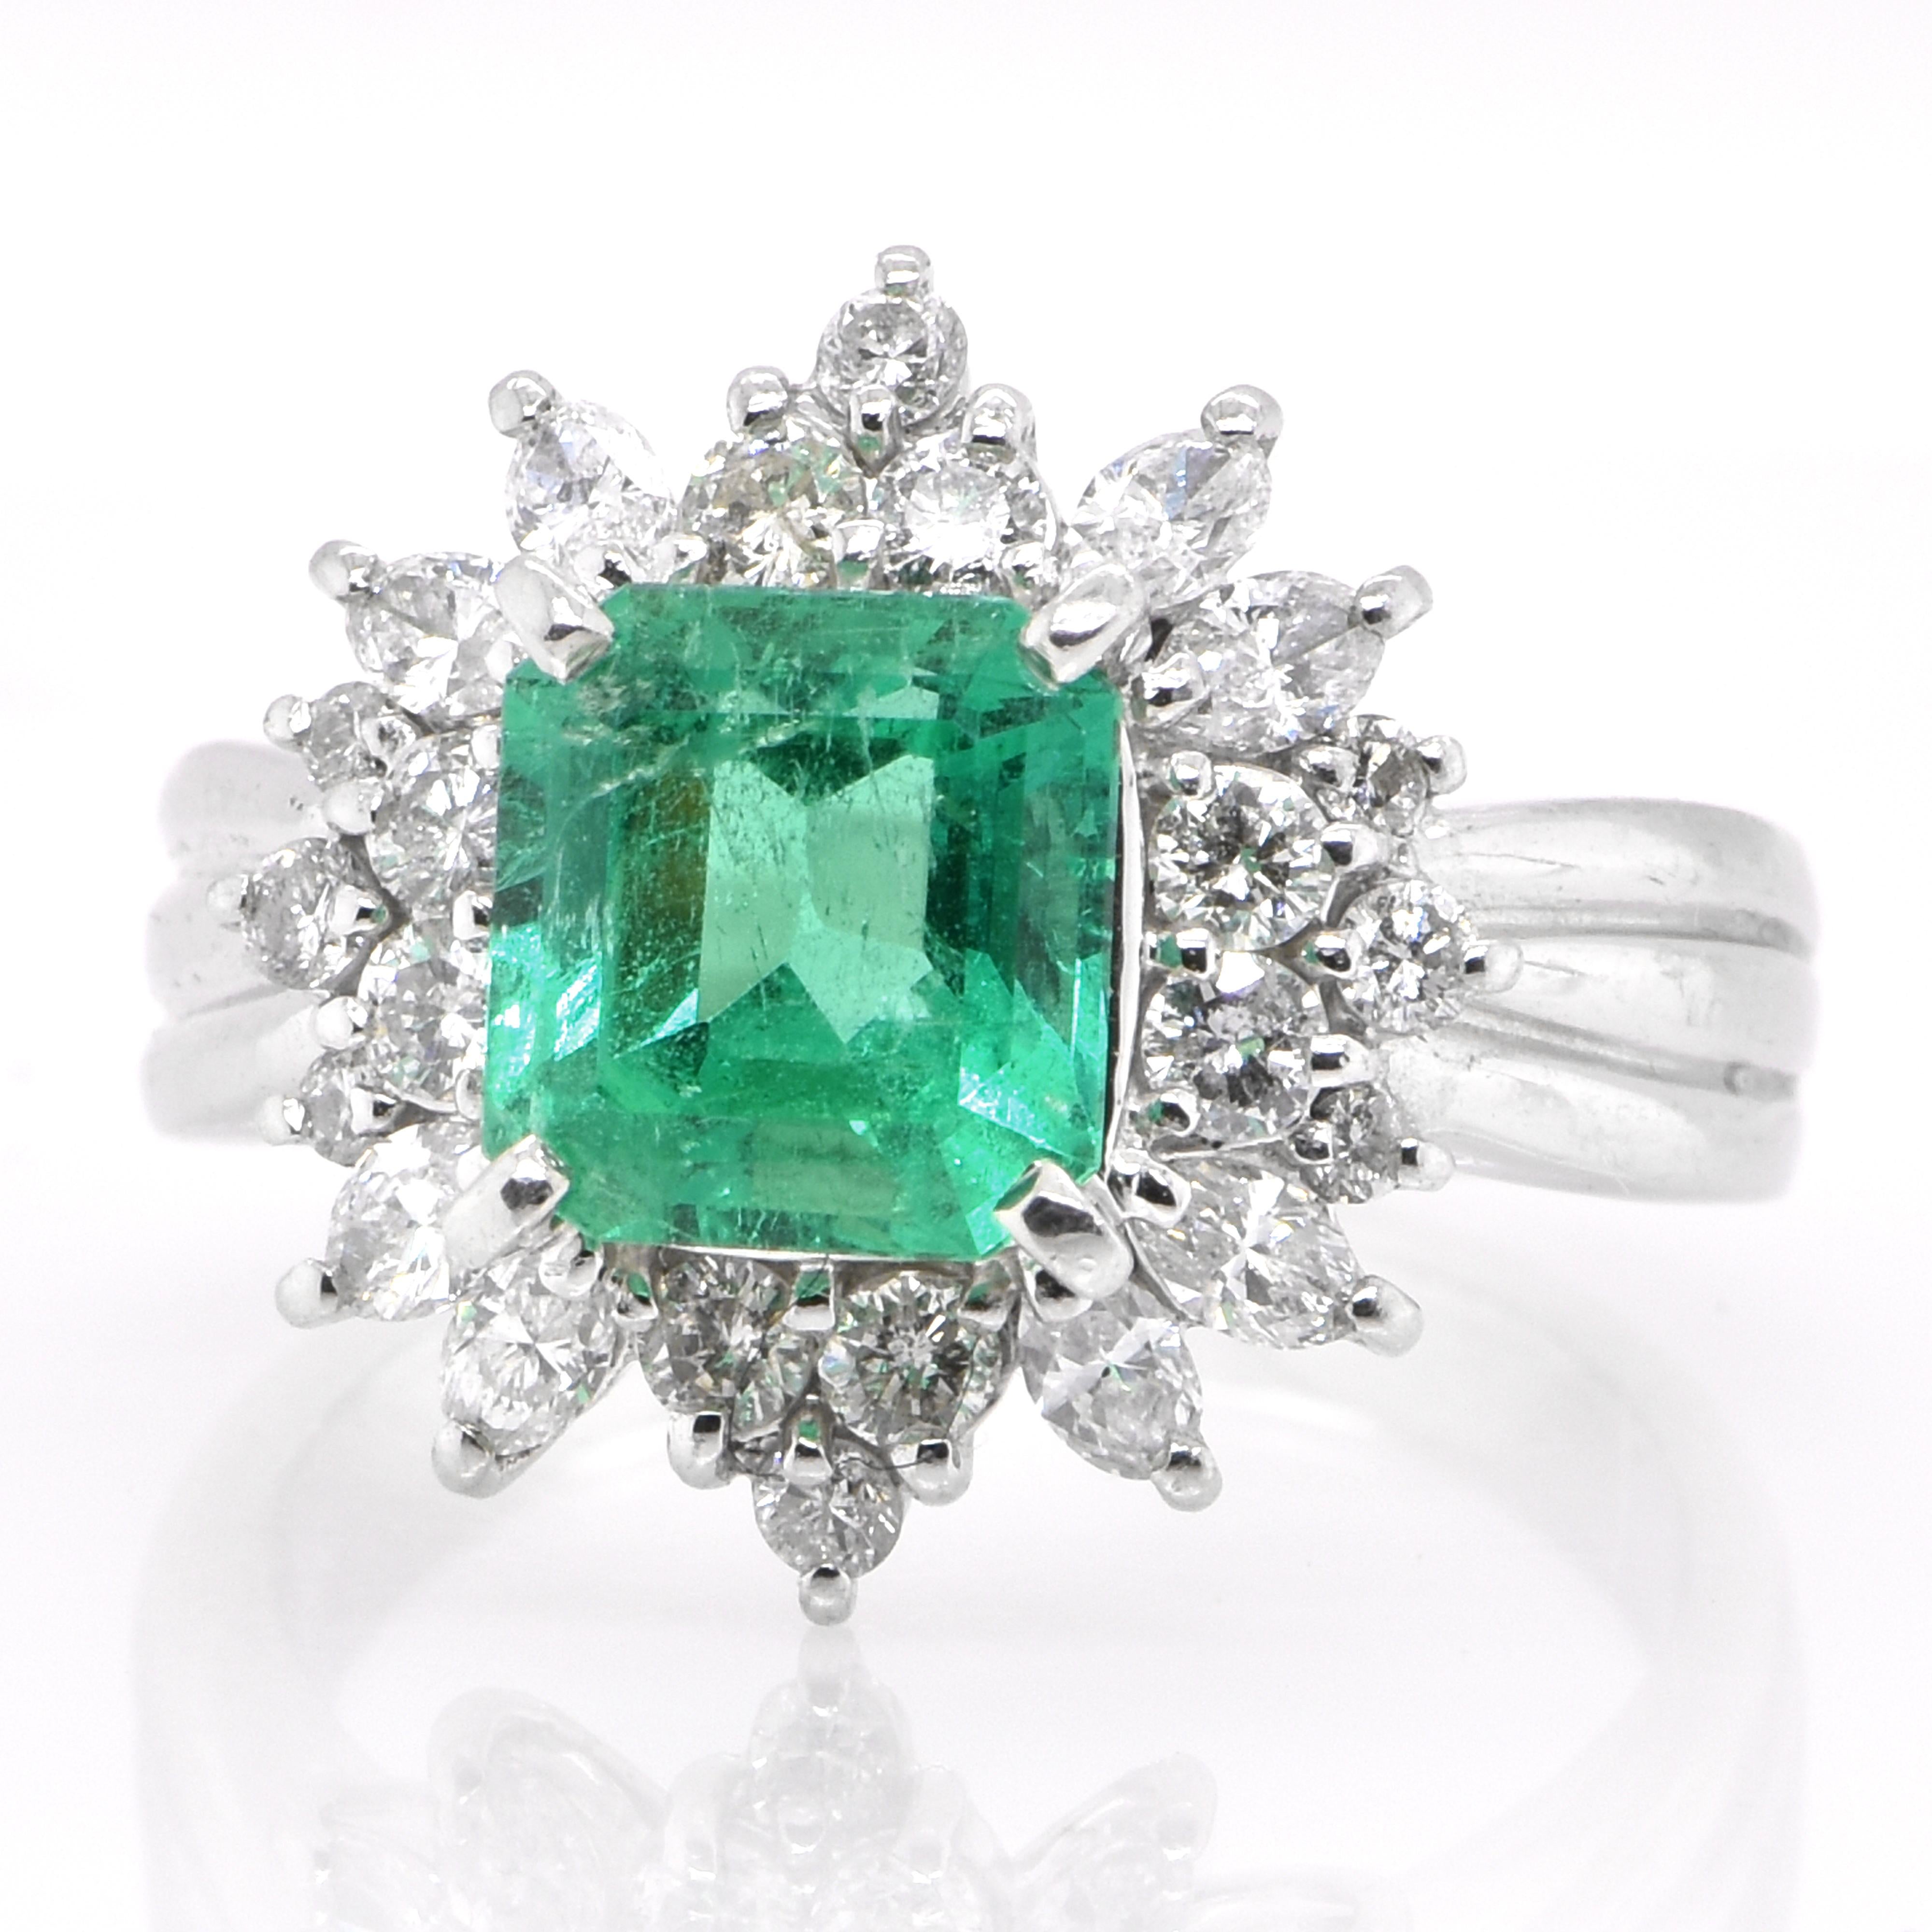 A stunning ring featuring a 1.90 Carat Natural Colombian Emerald and 0.905 Carats of Diamond Accents set in Platinum. People have admired emerald’s green for thousands of years. Emeralds have always been associated with the lushest landscapes and